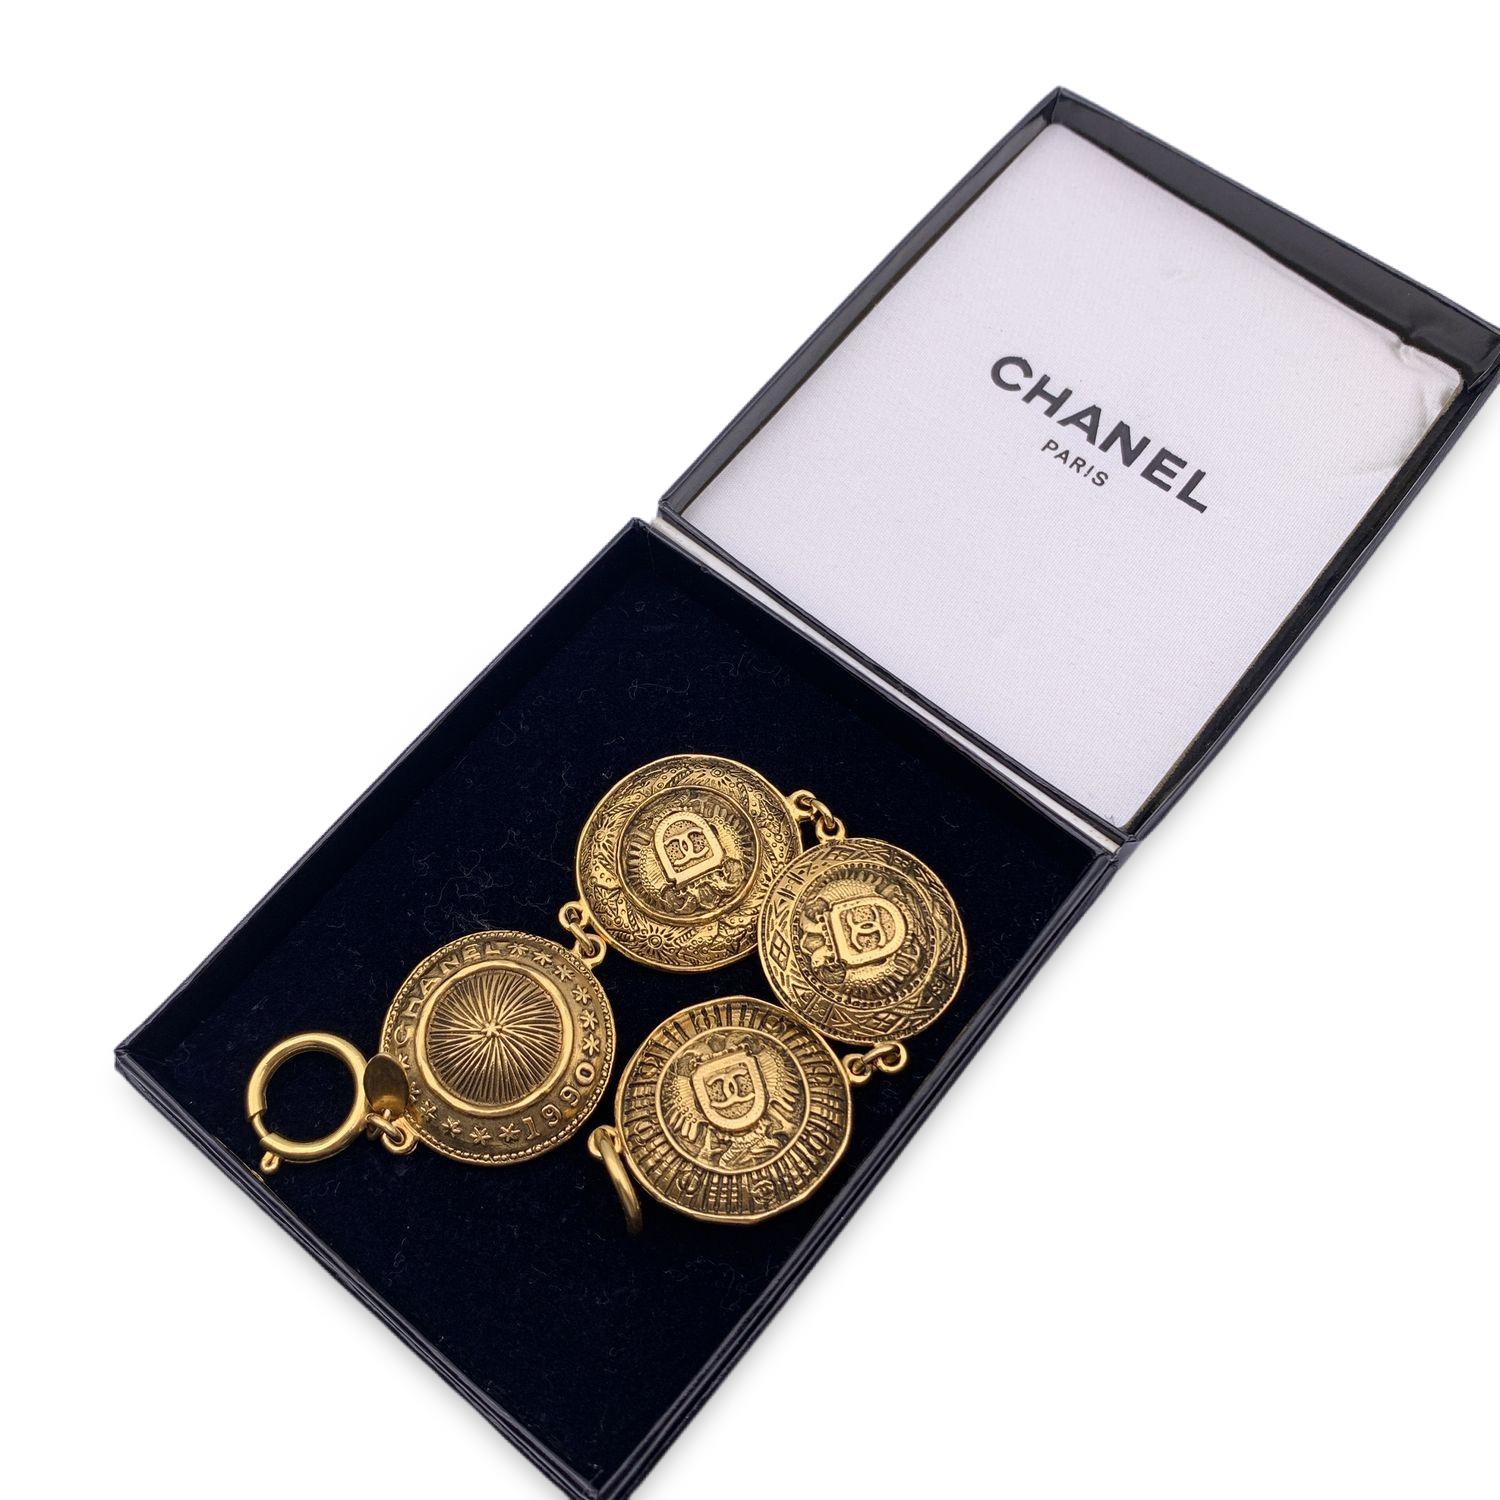 Beautiful rare bracelet by CHANEL from the 90s. 4 gold embossed metal medallion with CC logos. 'CHANEL CC Made in France' oval hallmark at the end of the bracelet. Spring ring closure. Total length:7 inches - 17.8 cm

Condition

A -